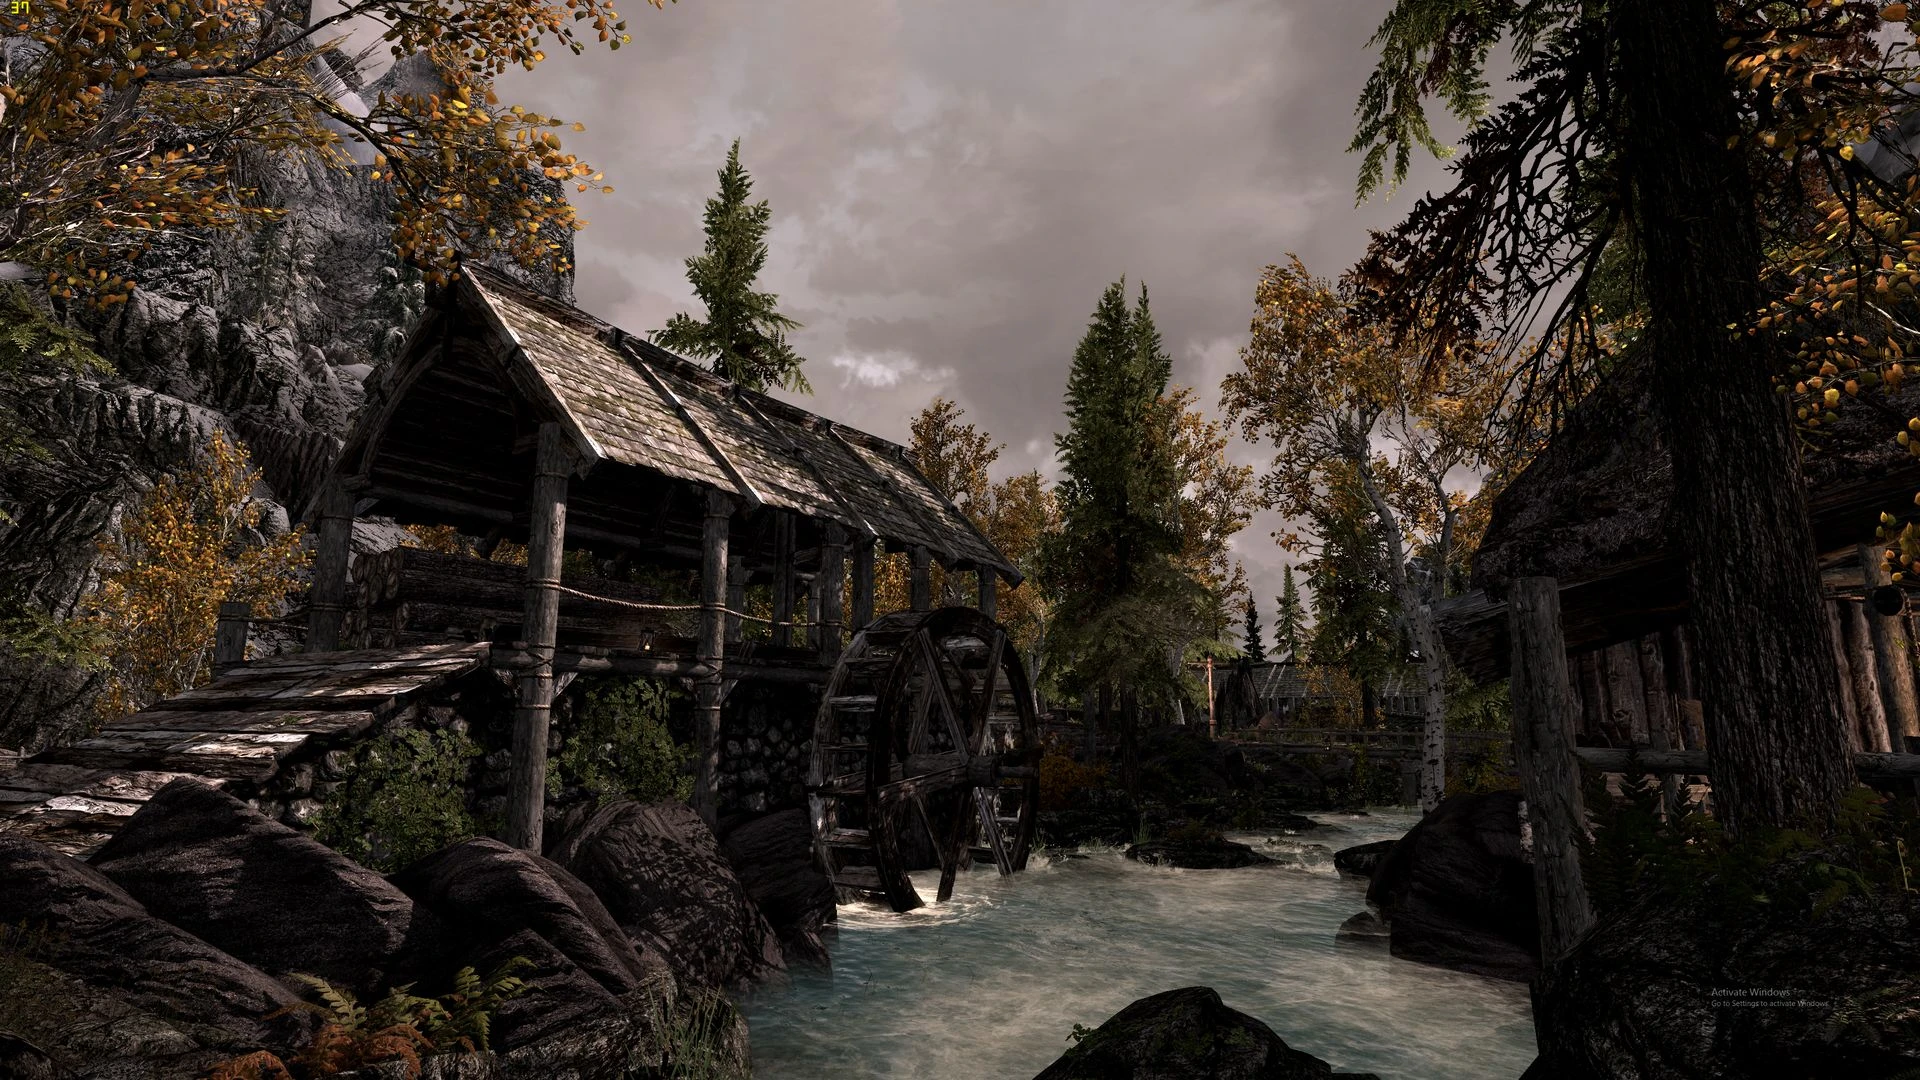 skyrim sweetfx messed up my enb